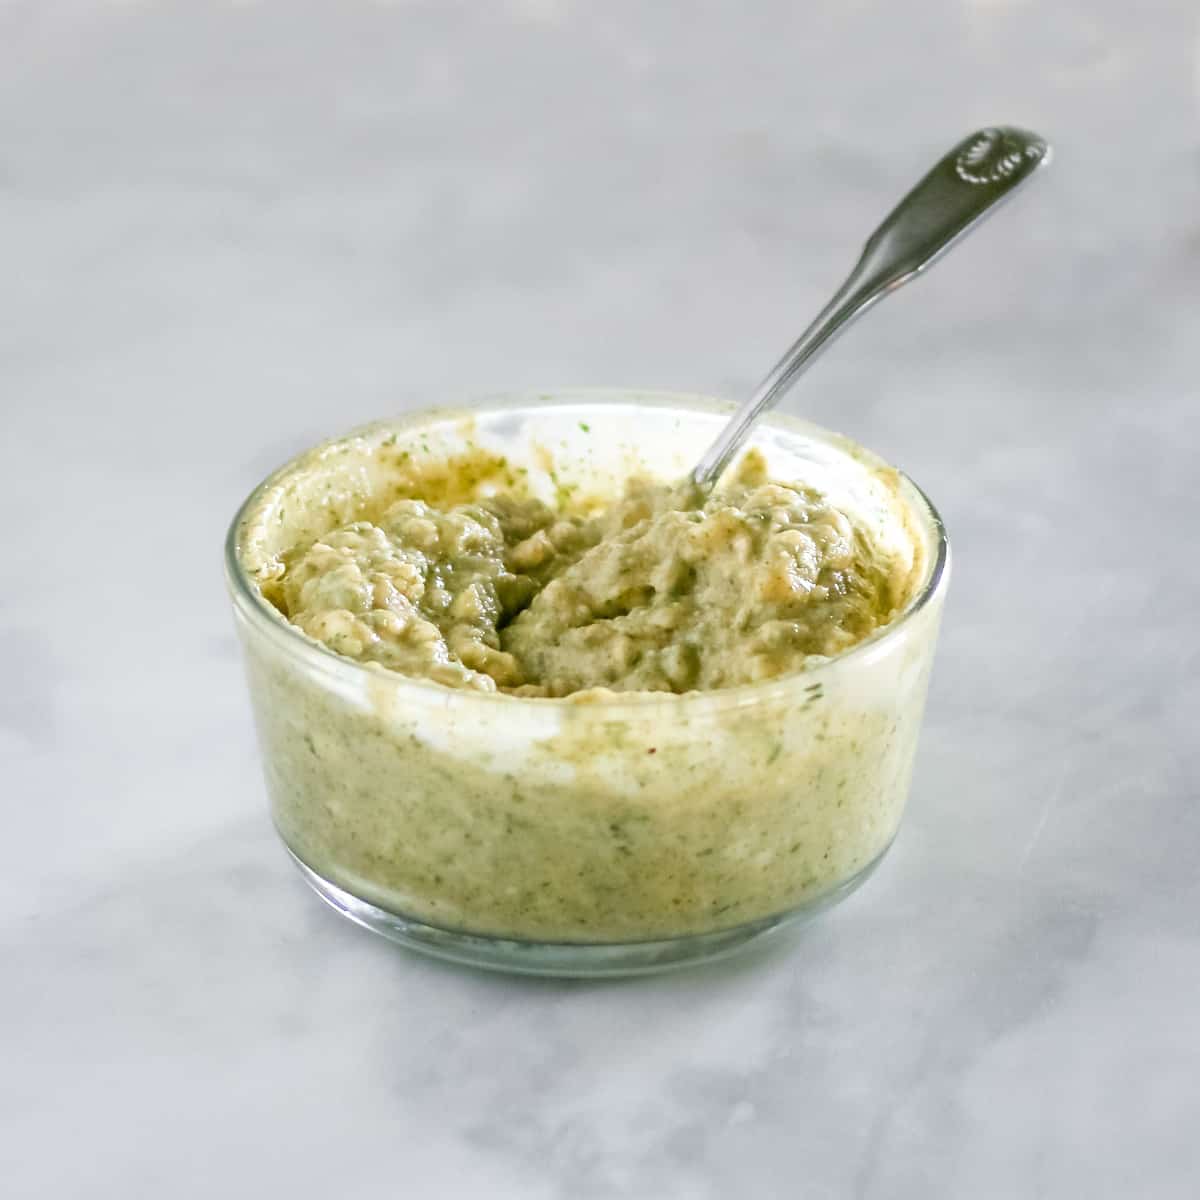 Garlic herb butter in a small glass bowl.